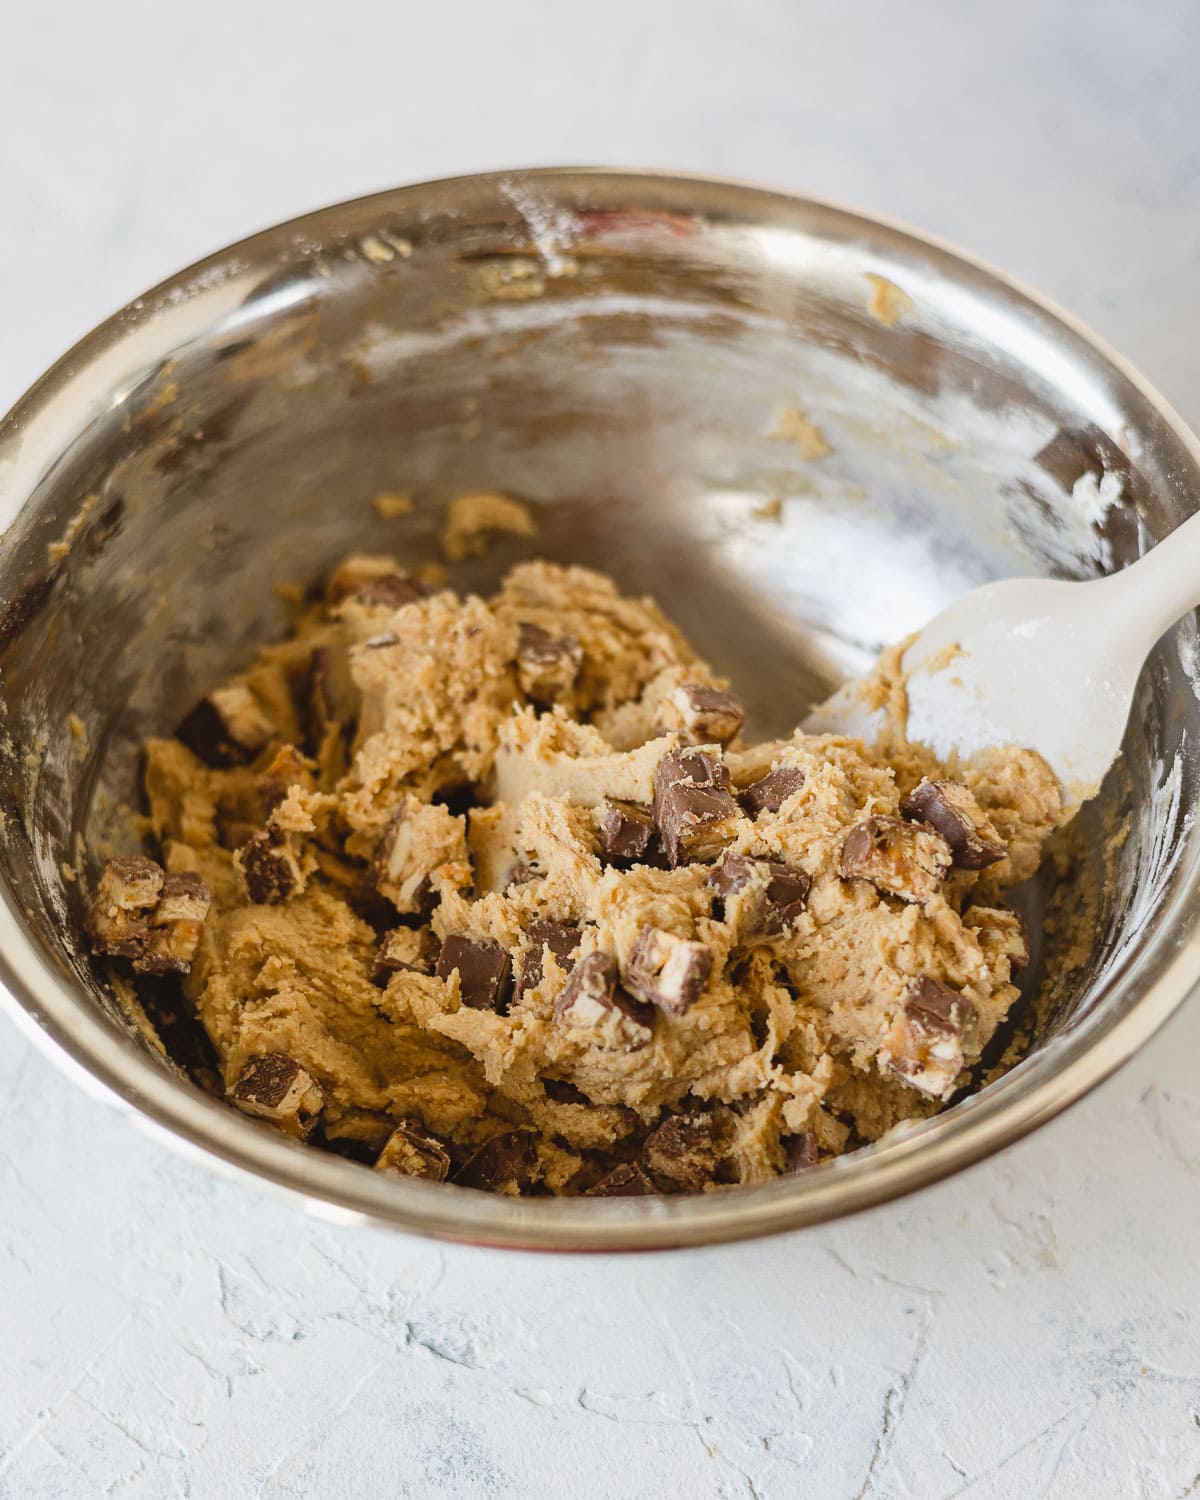 A metal bowl with Peanut Butter Snickers cookie dough.